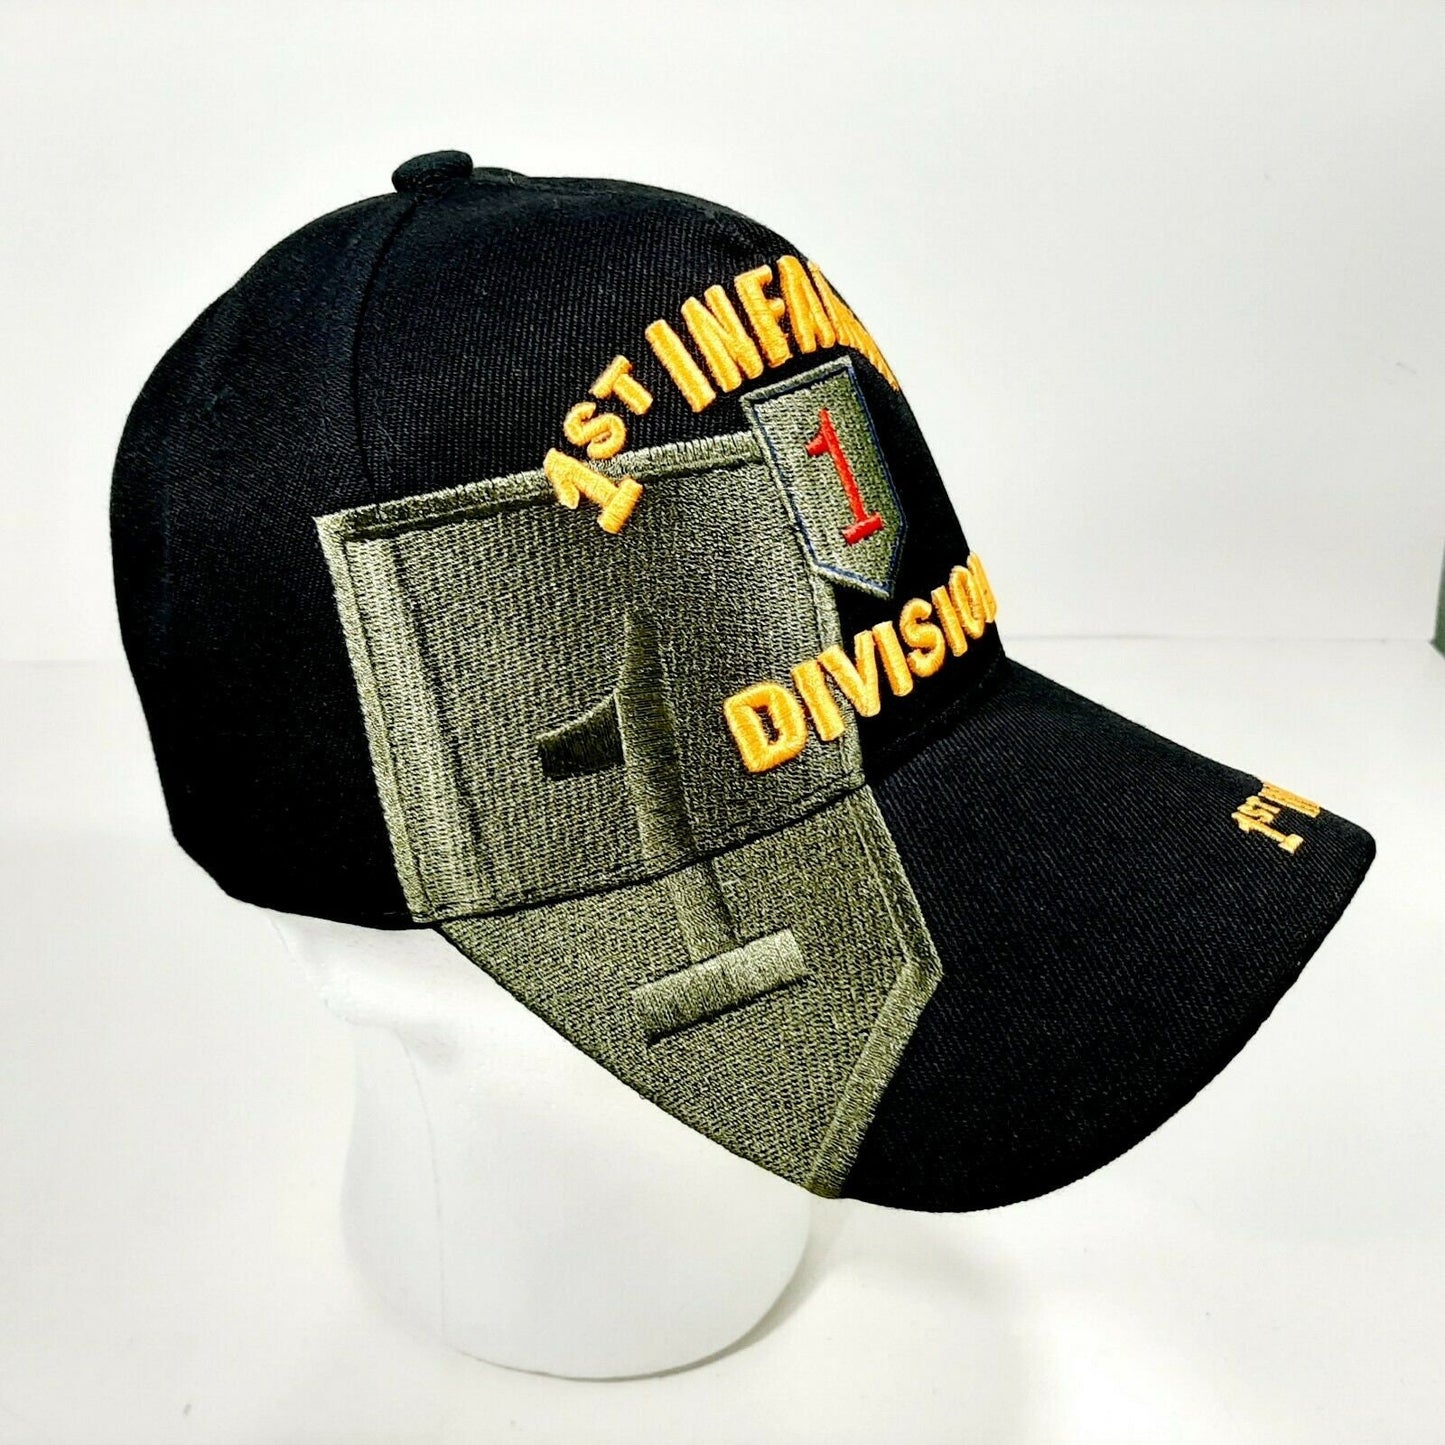 US Army 1st Infantry Division Men's Ball Cap Hat Black Acrylic Embroidered